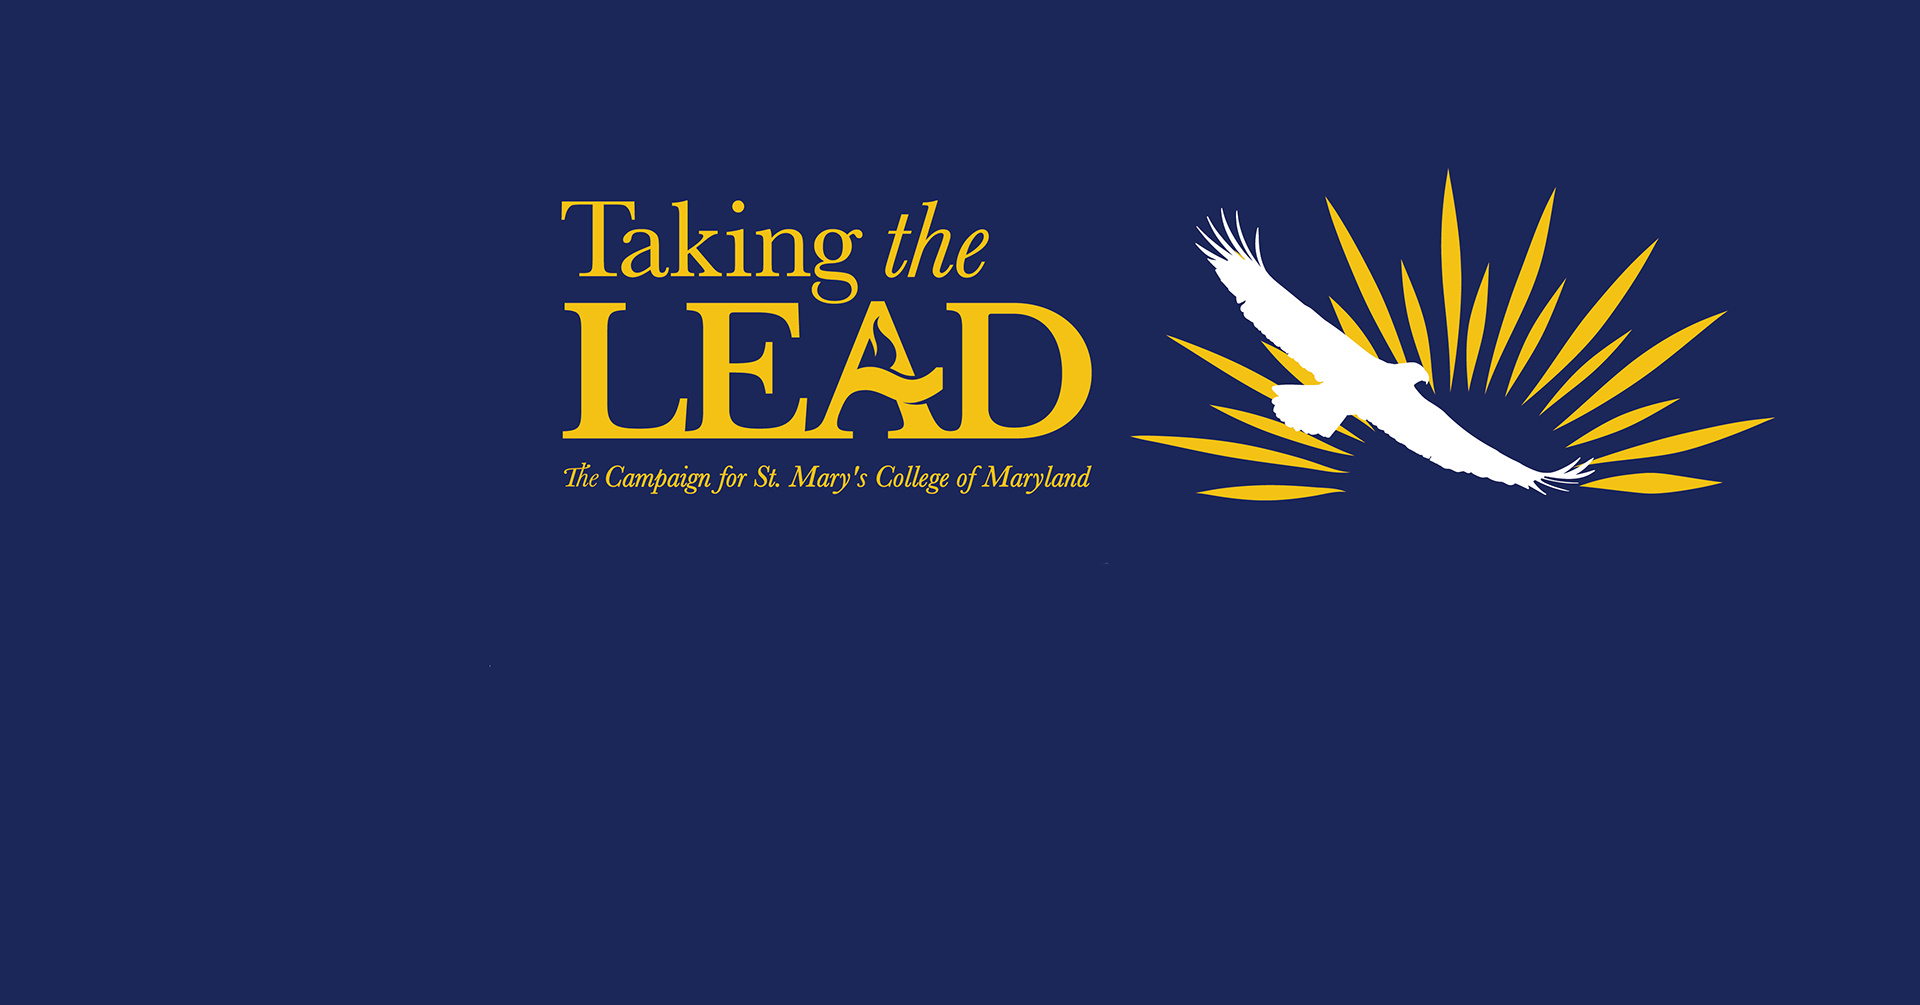 "Taking the lead" "The campaign for St. Mary's College of Maryland" text in gold on a navy background